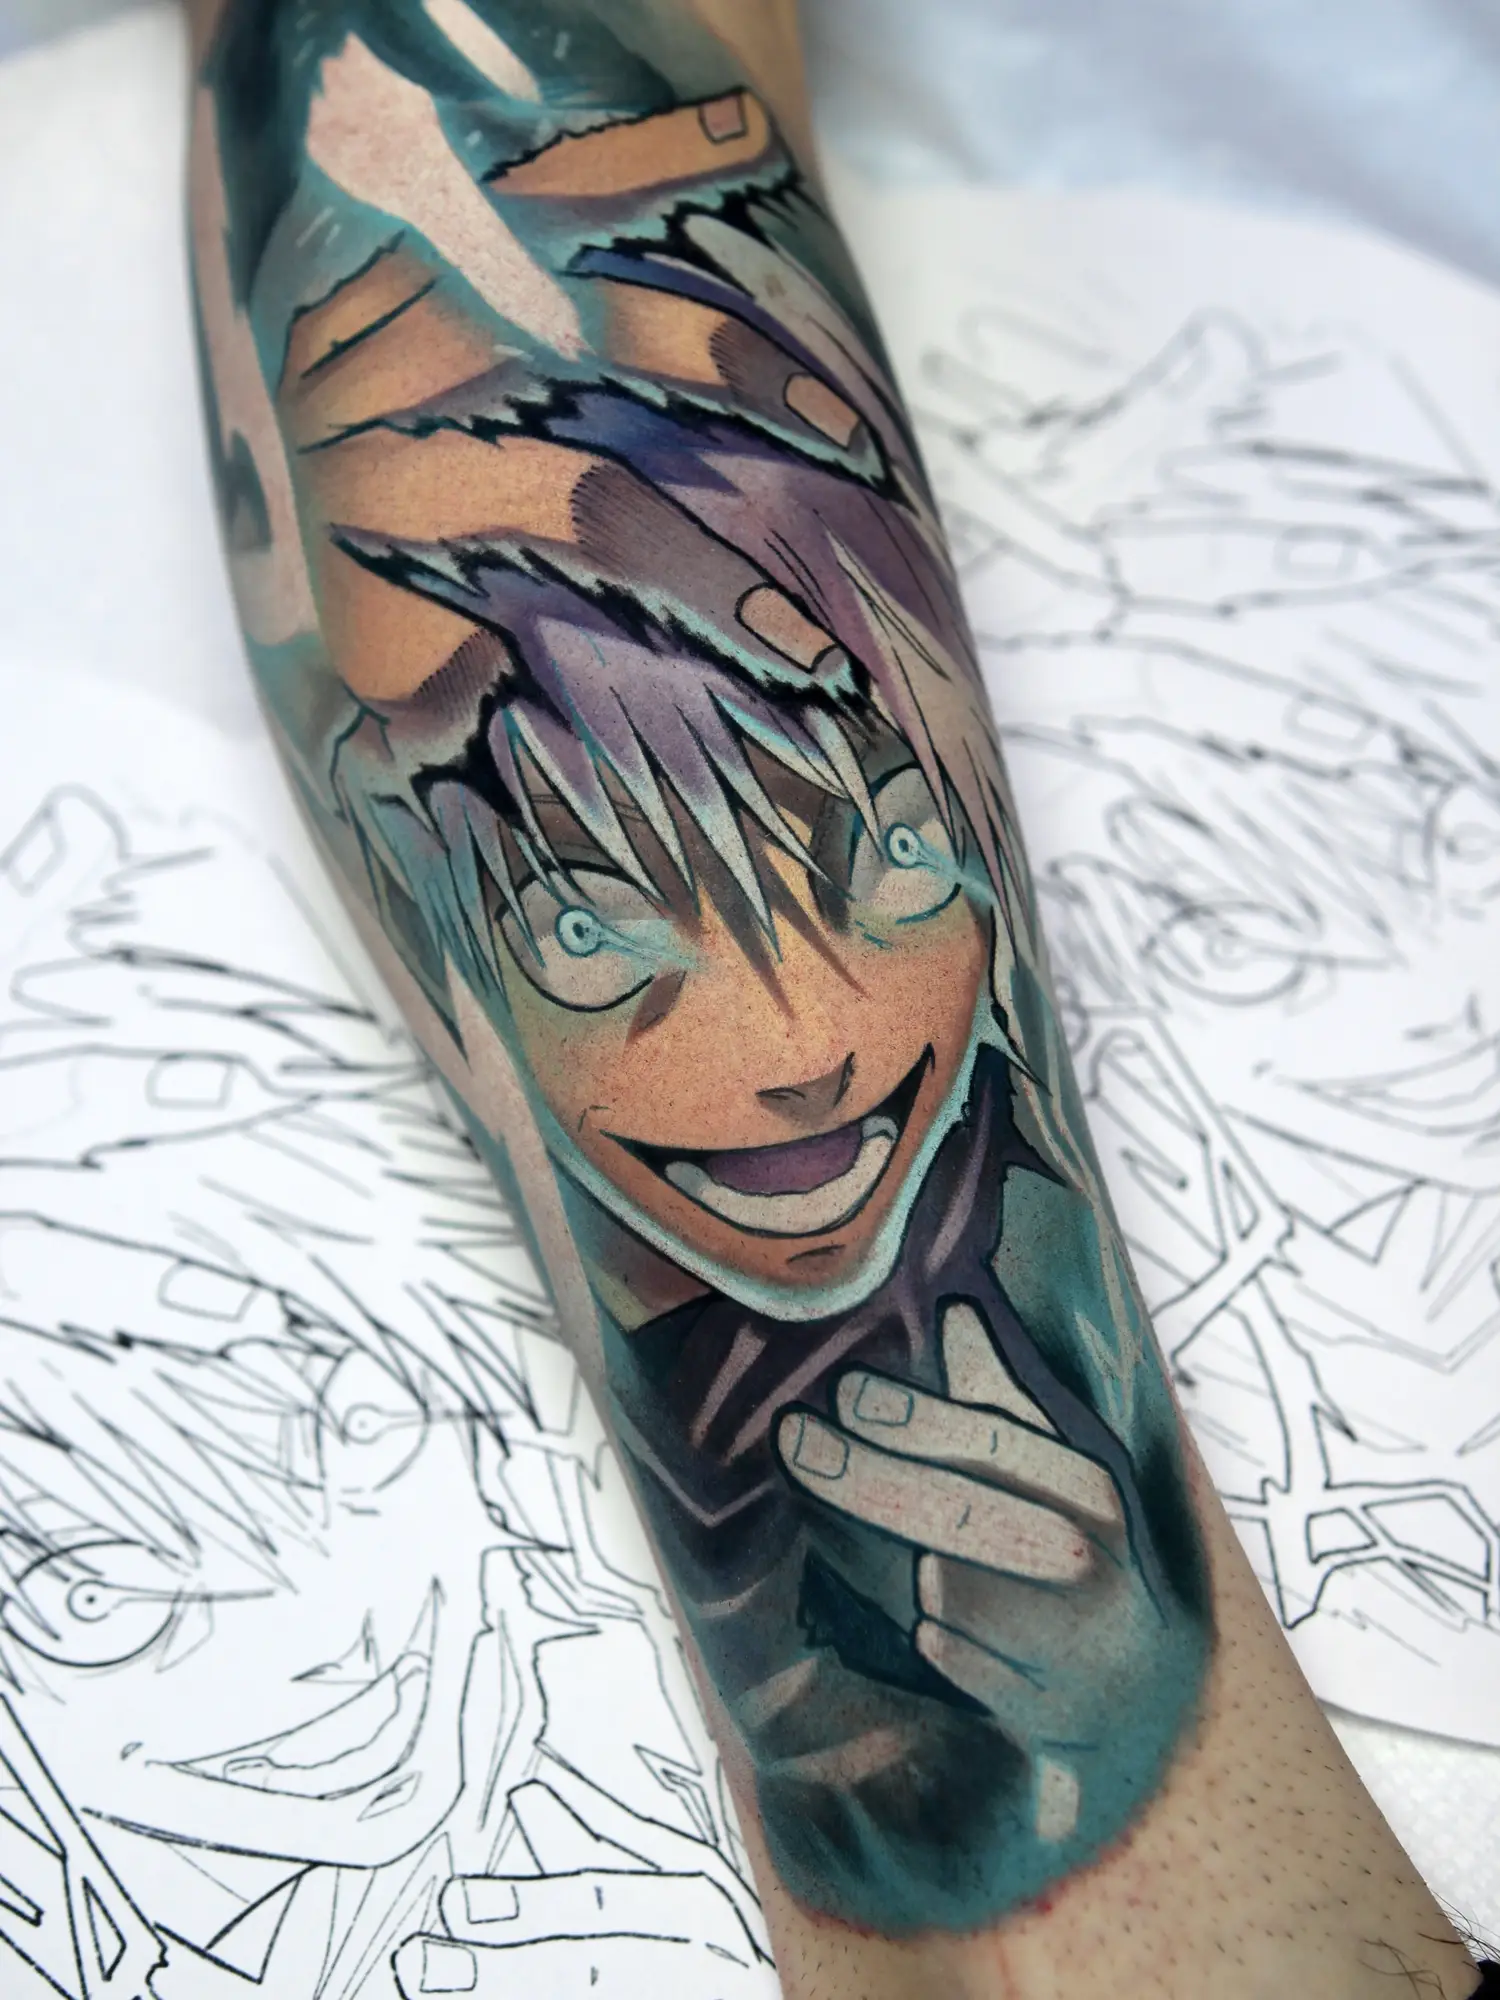 FIRST POST- Gojo tattoo from Jujutsu Kaisen! | Gallery posted by Mike dazzo  | Lemon8